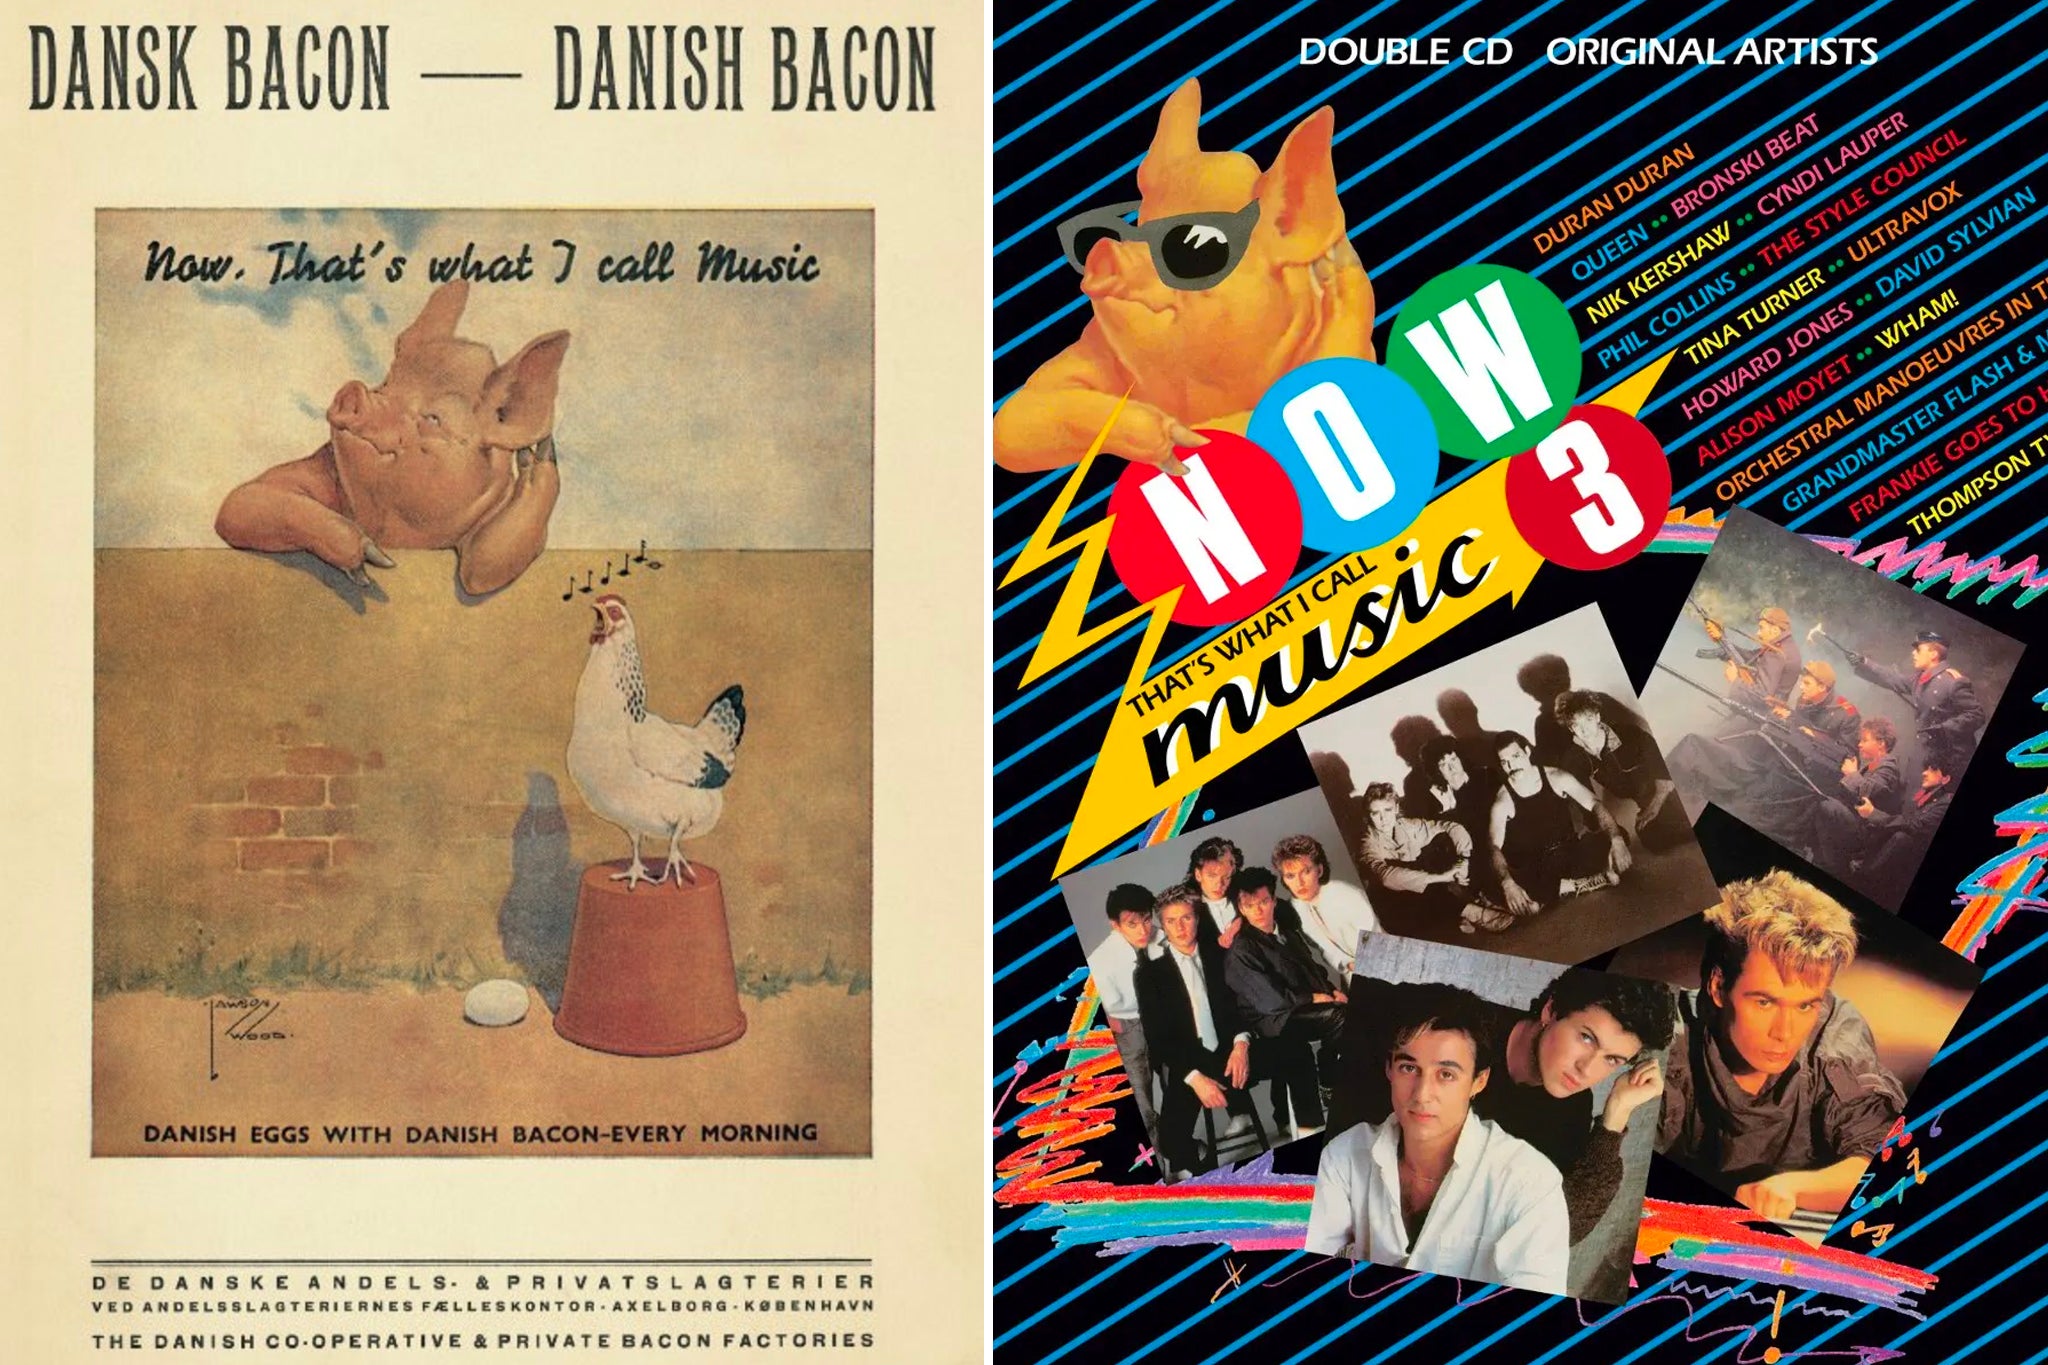 The ‘Now That’s What I Call Music!’ series got its name from an 1930s poster for Danish bacon